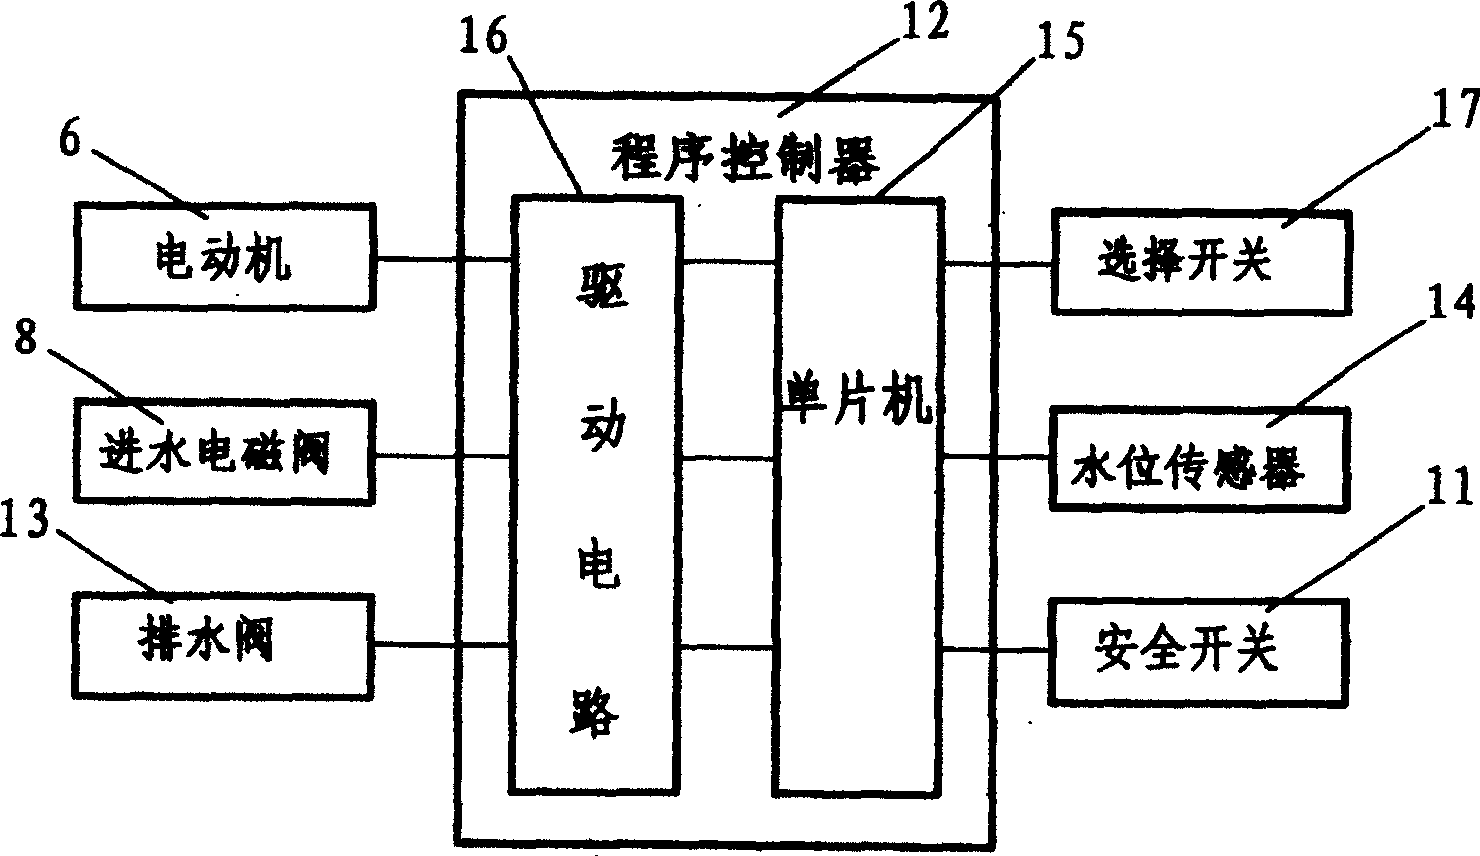 Washing machine with variable-frequency drive